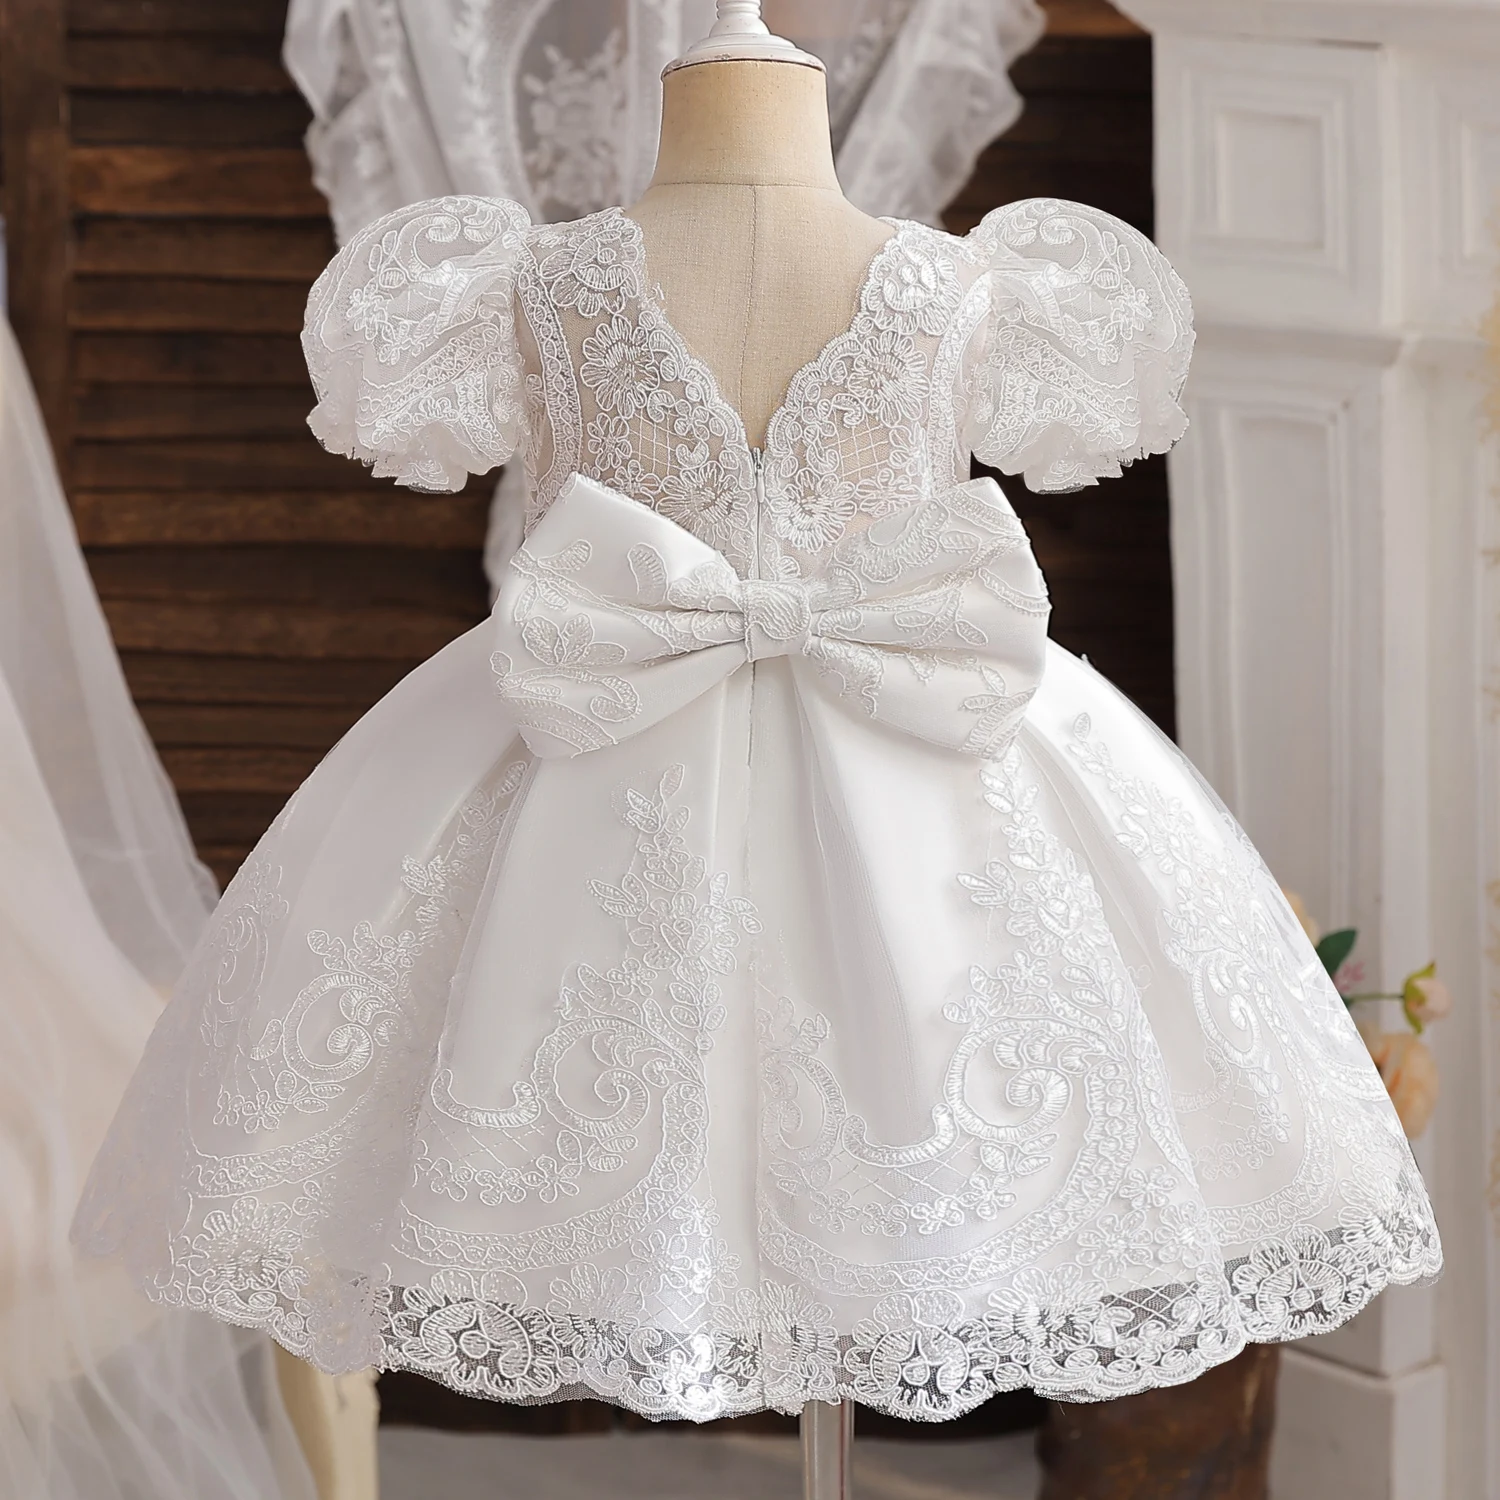 Baby Bow Birthday Princess Dress Elegant Girl Embroidery Flower Beaded White Baptism Tutu Gown Kids Formal Evening Party Costume